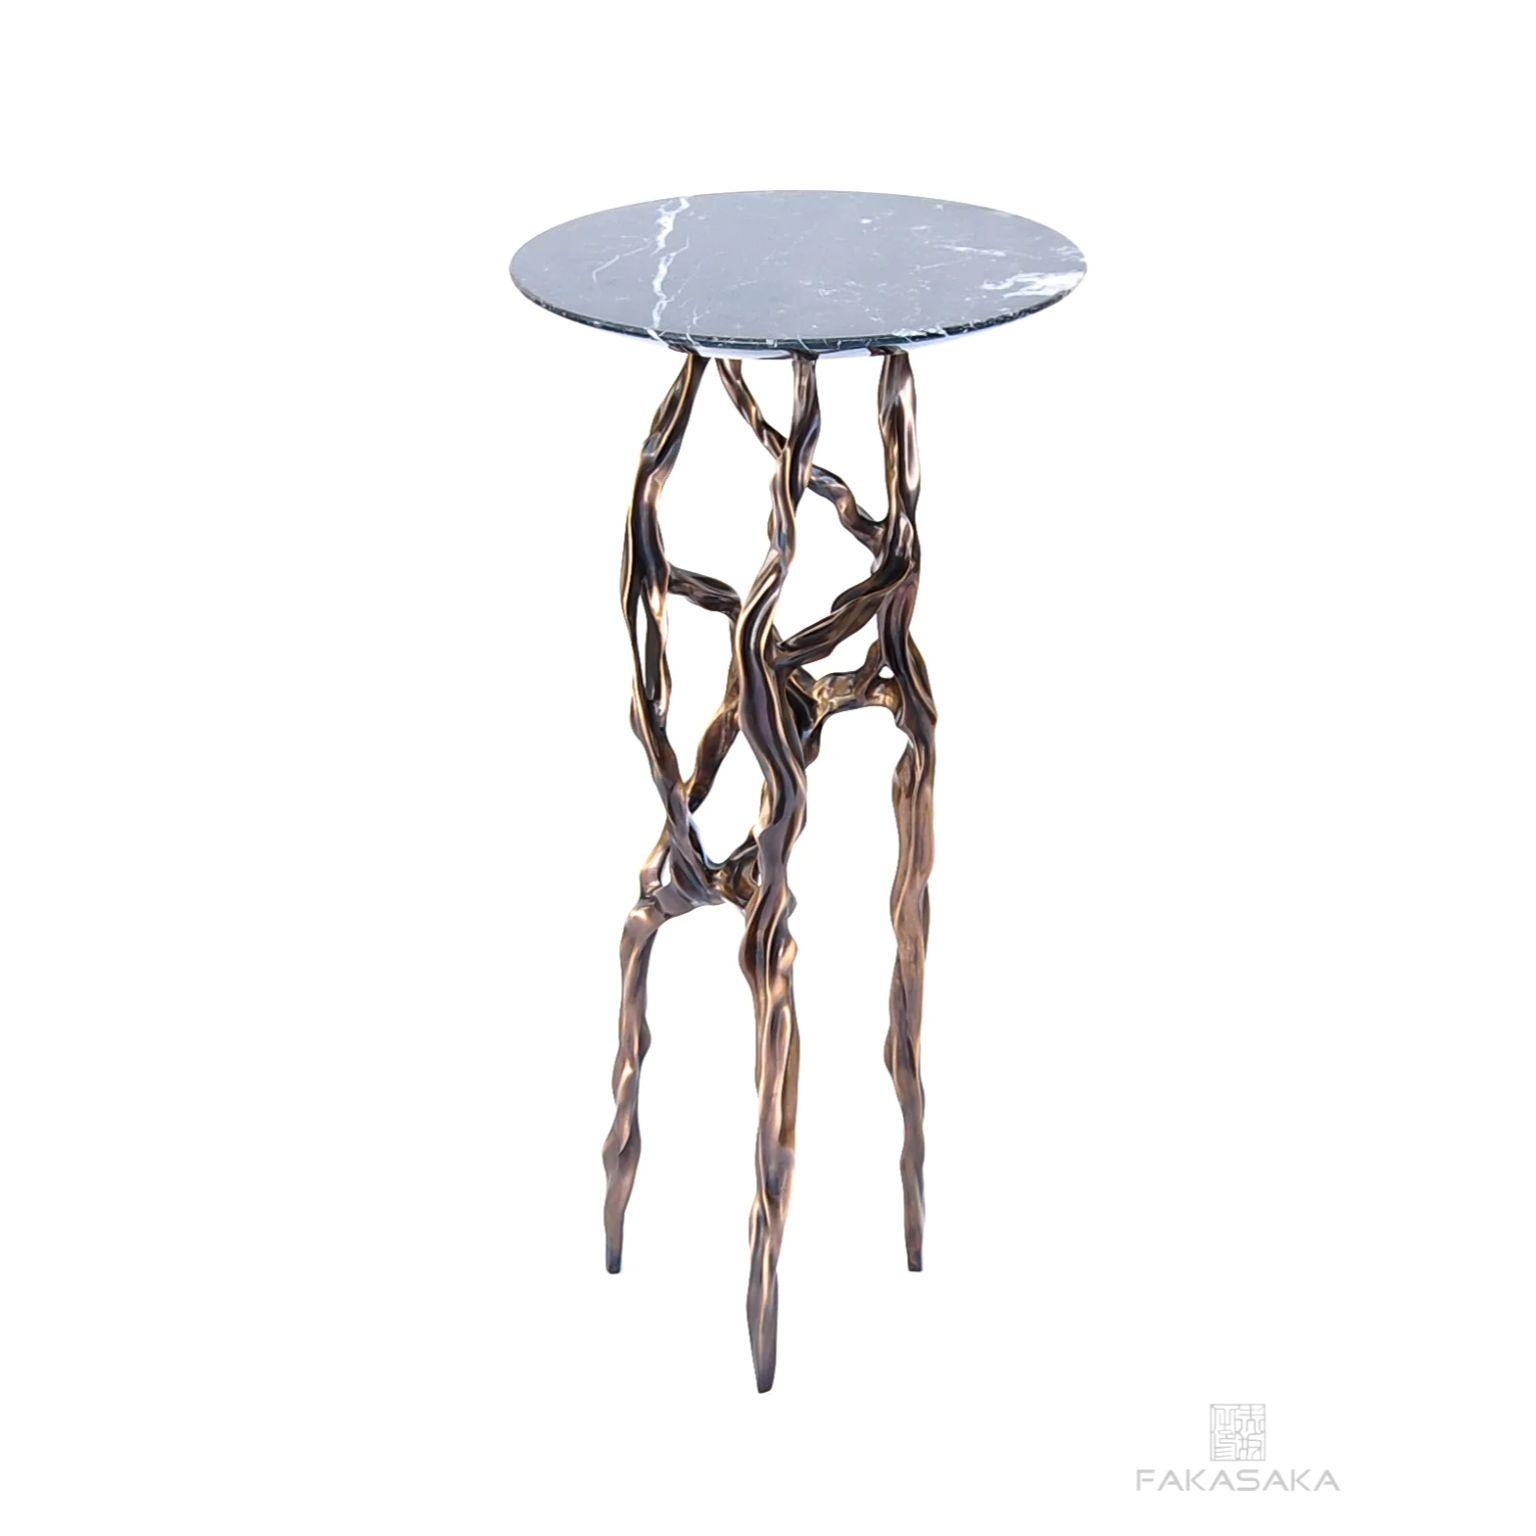 Alexia drink table with Nero Marquina Marble top by Fakasaka Design
Dimensions: W 30 cm, D 30 cm, H 62 cm.
Materials: dark bronze base, Nero Marquina marble top.
 
Also available in different table top materials (Nero Marquina Marble, Marrom